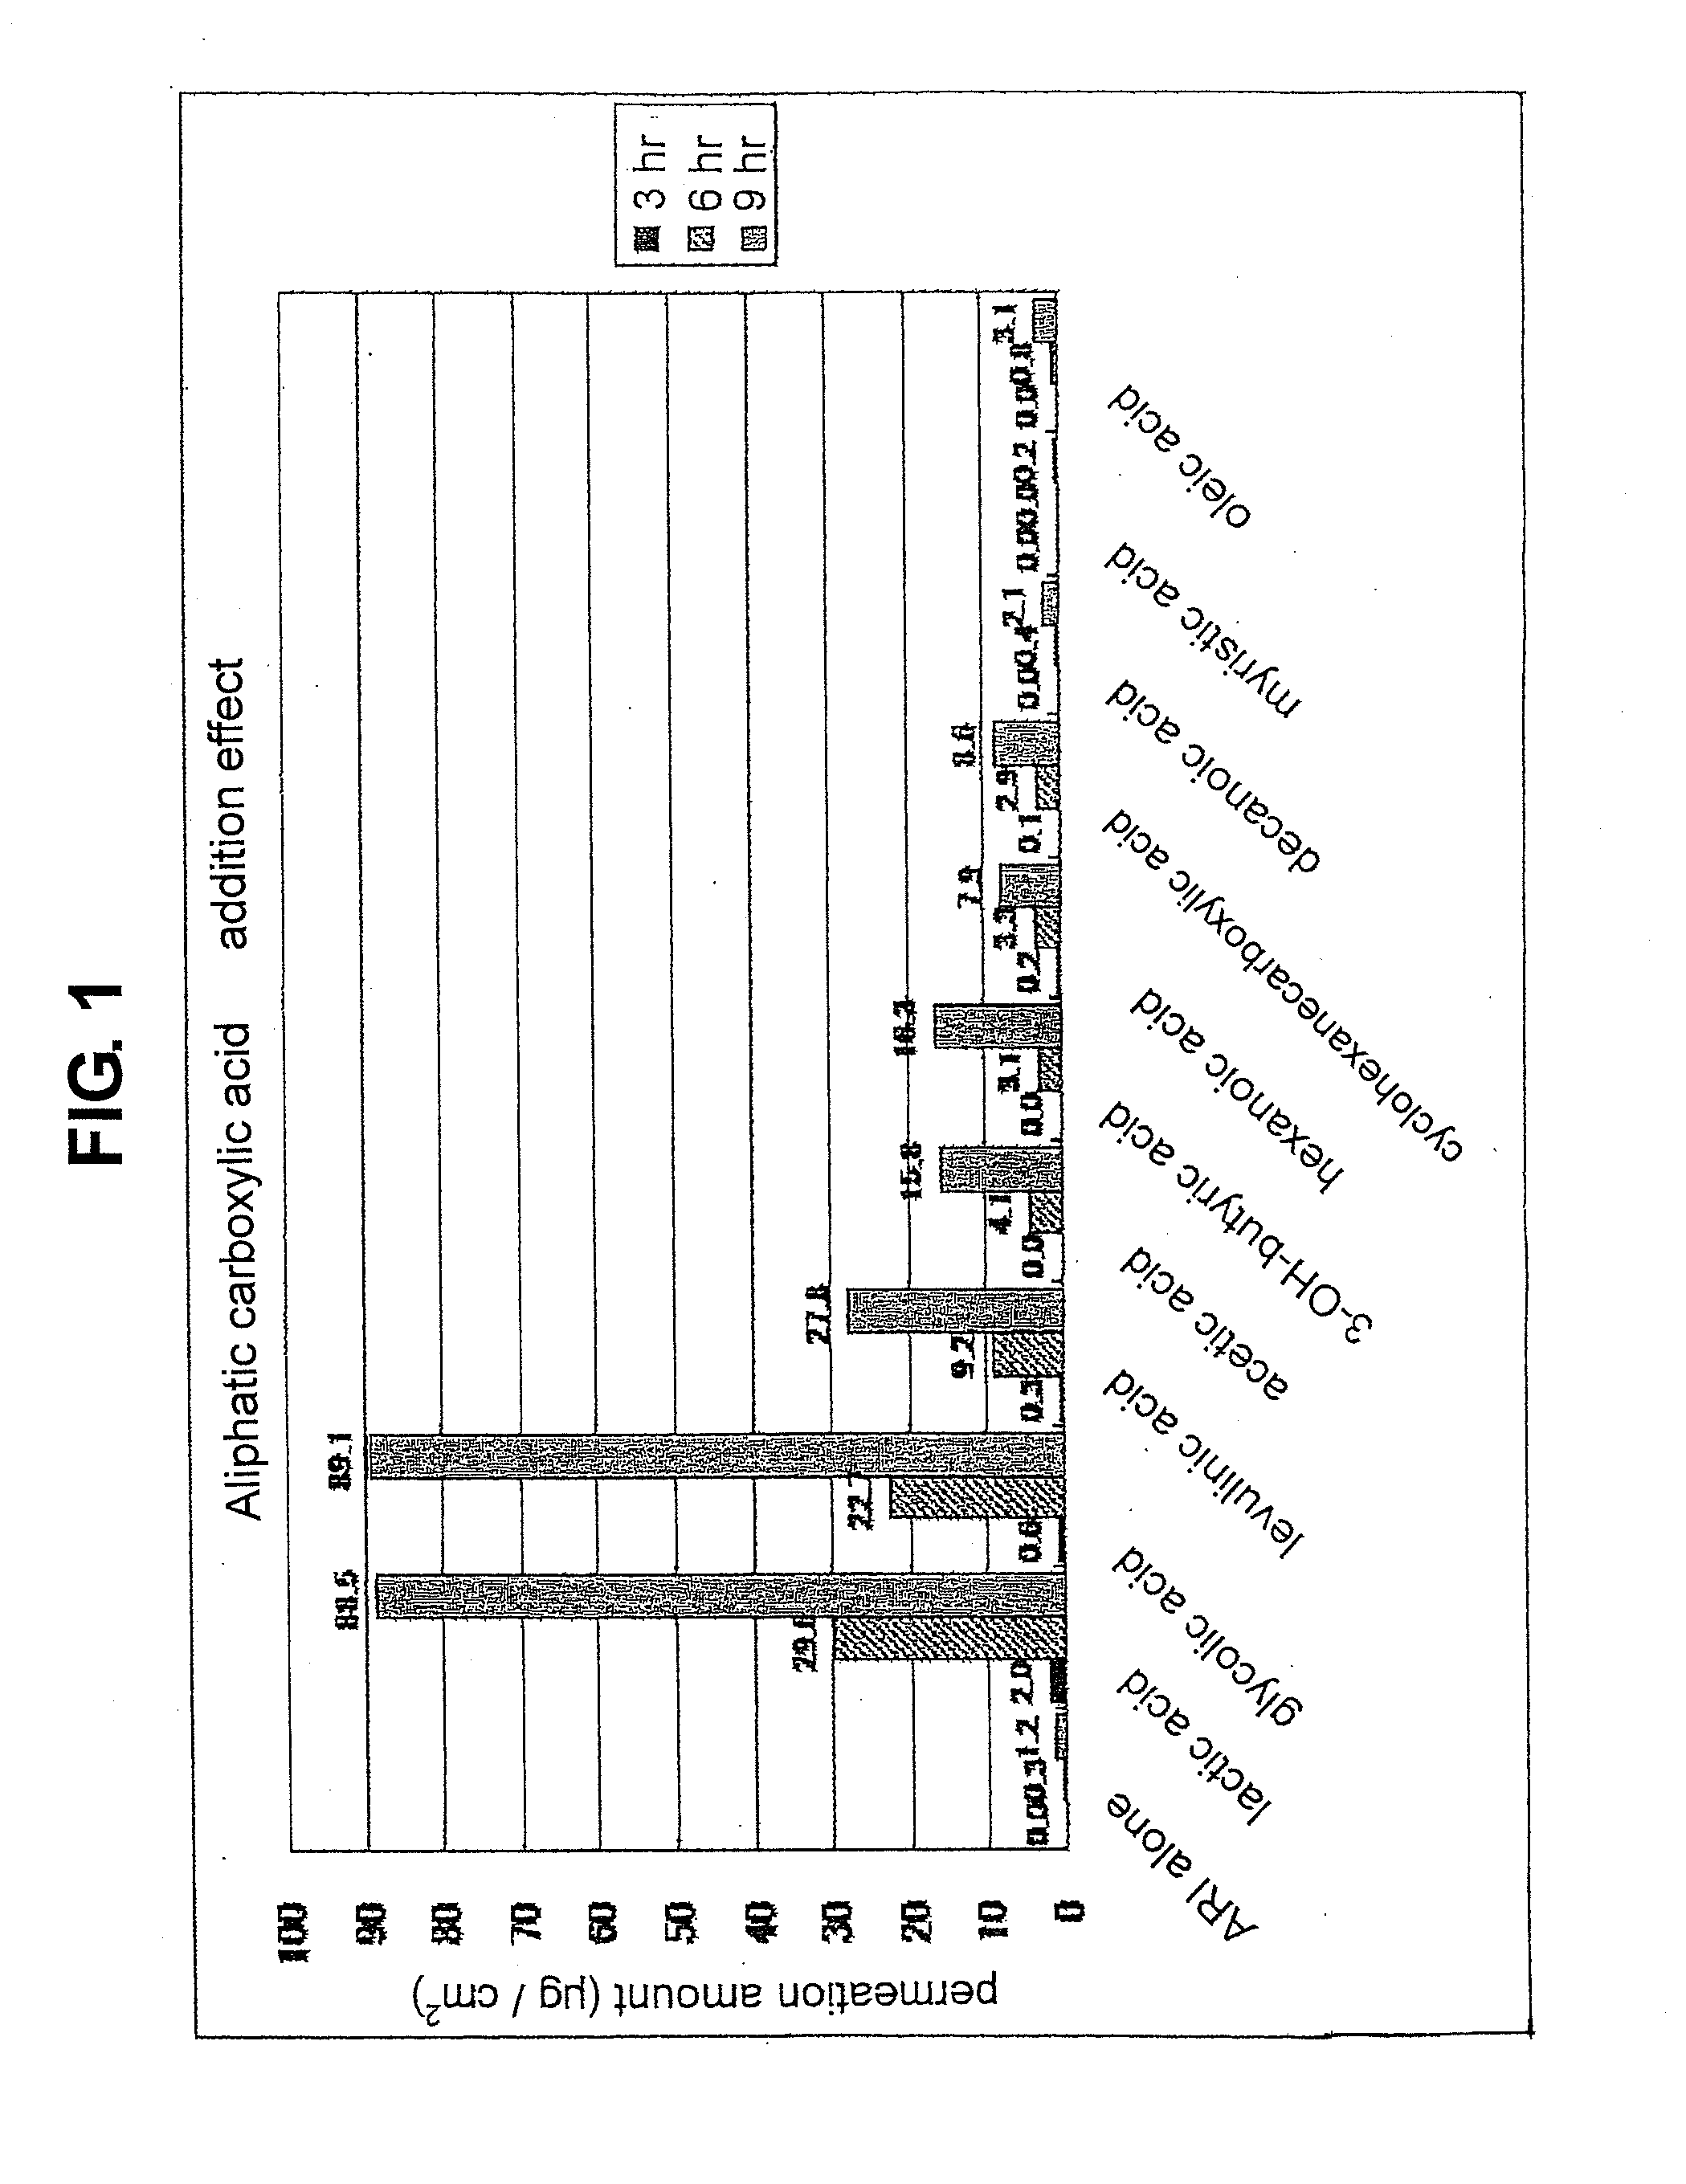 Composition for external application comprising aripiprazole and organic acid as active ingredients